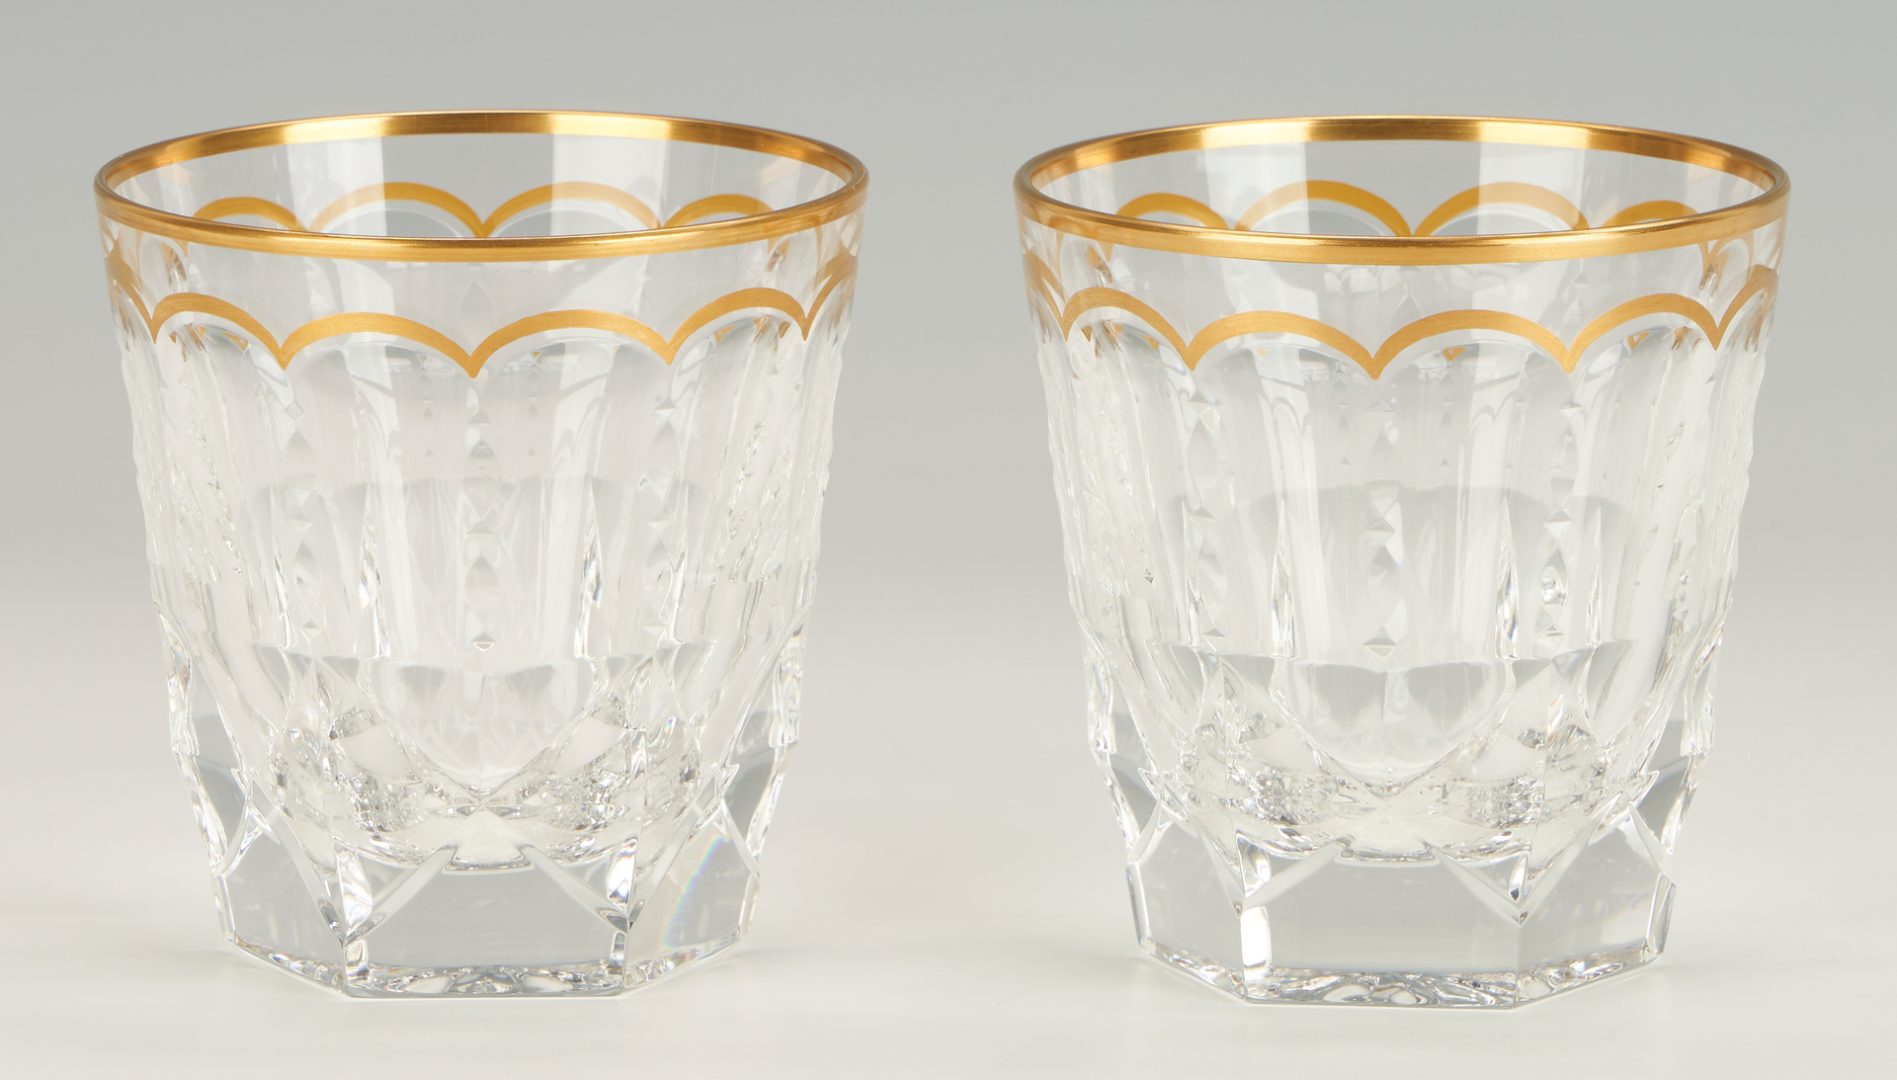 Lot 376: 5 pcs St. Louis Excellence Crystal, Pitcher & Old Fashioned Glasses